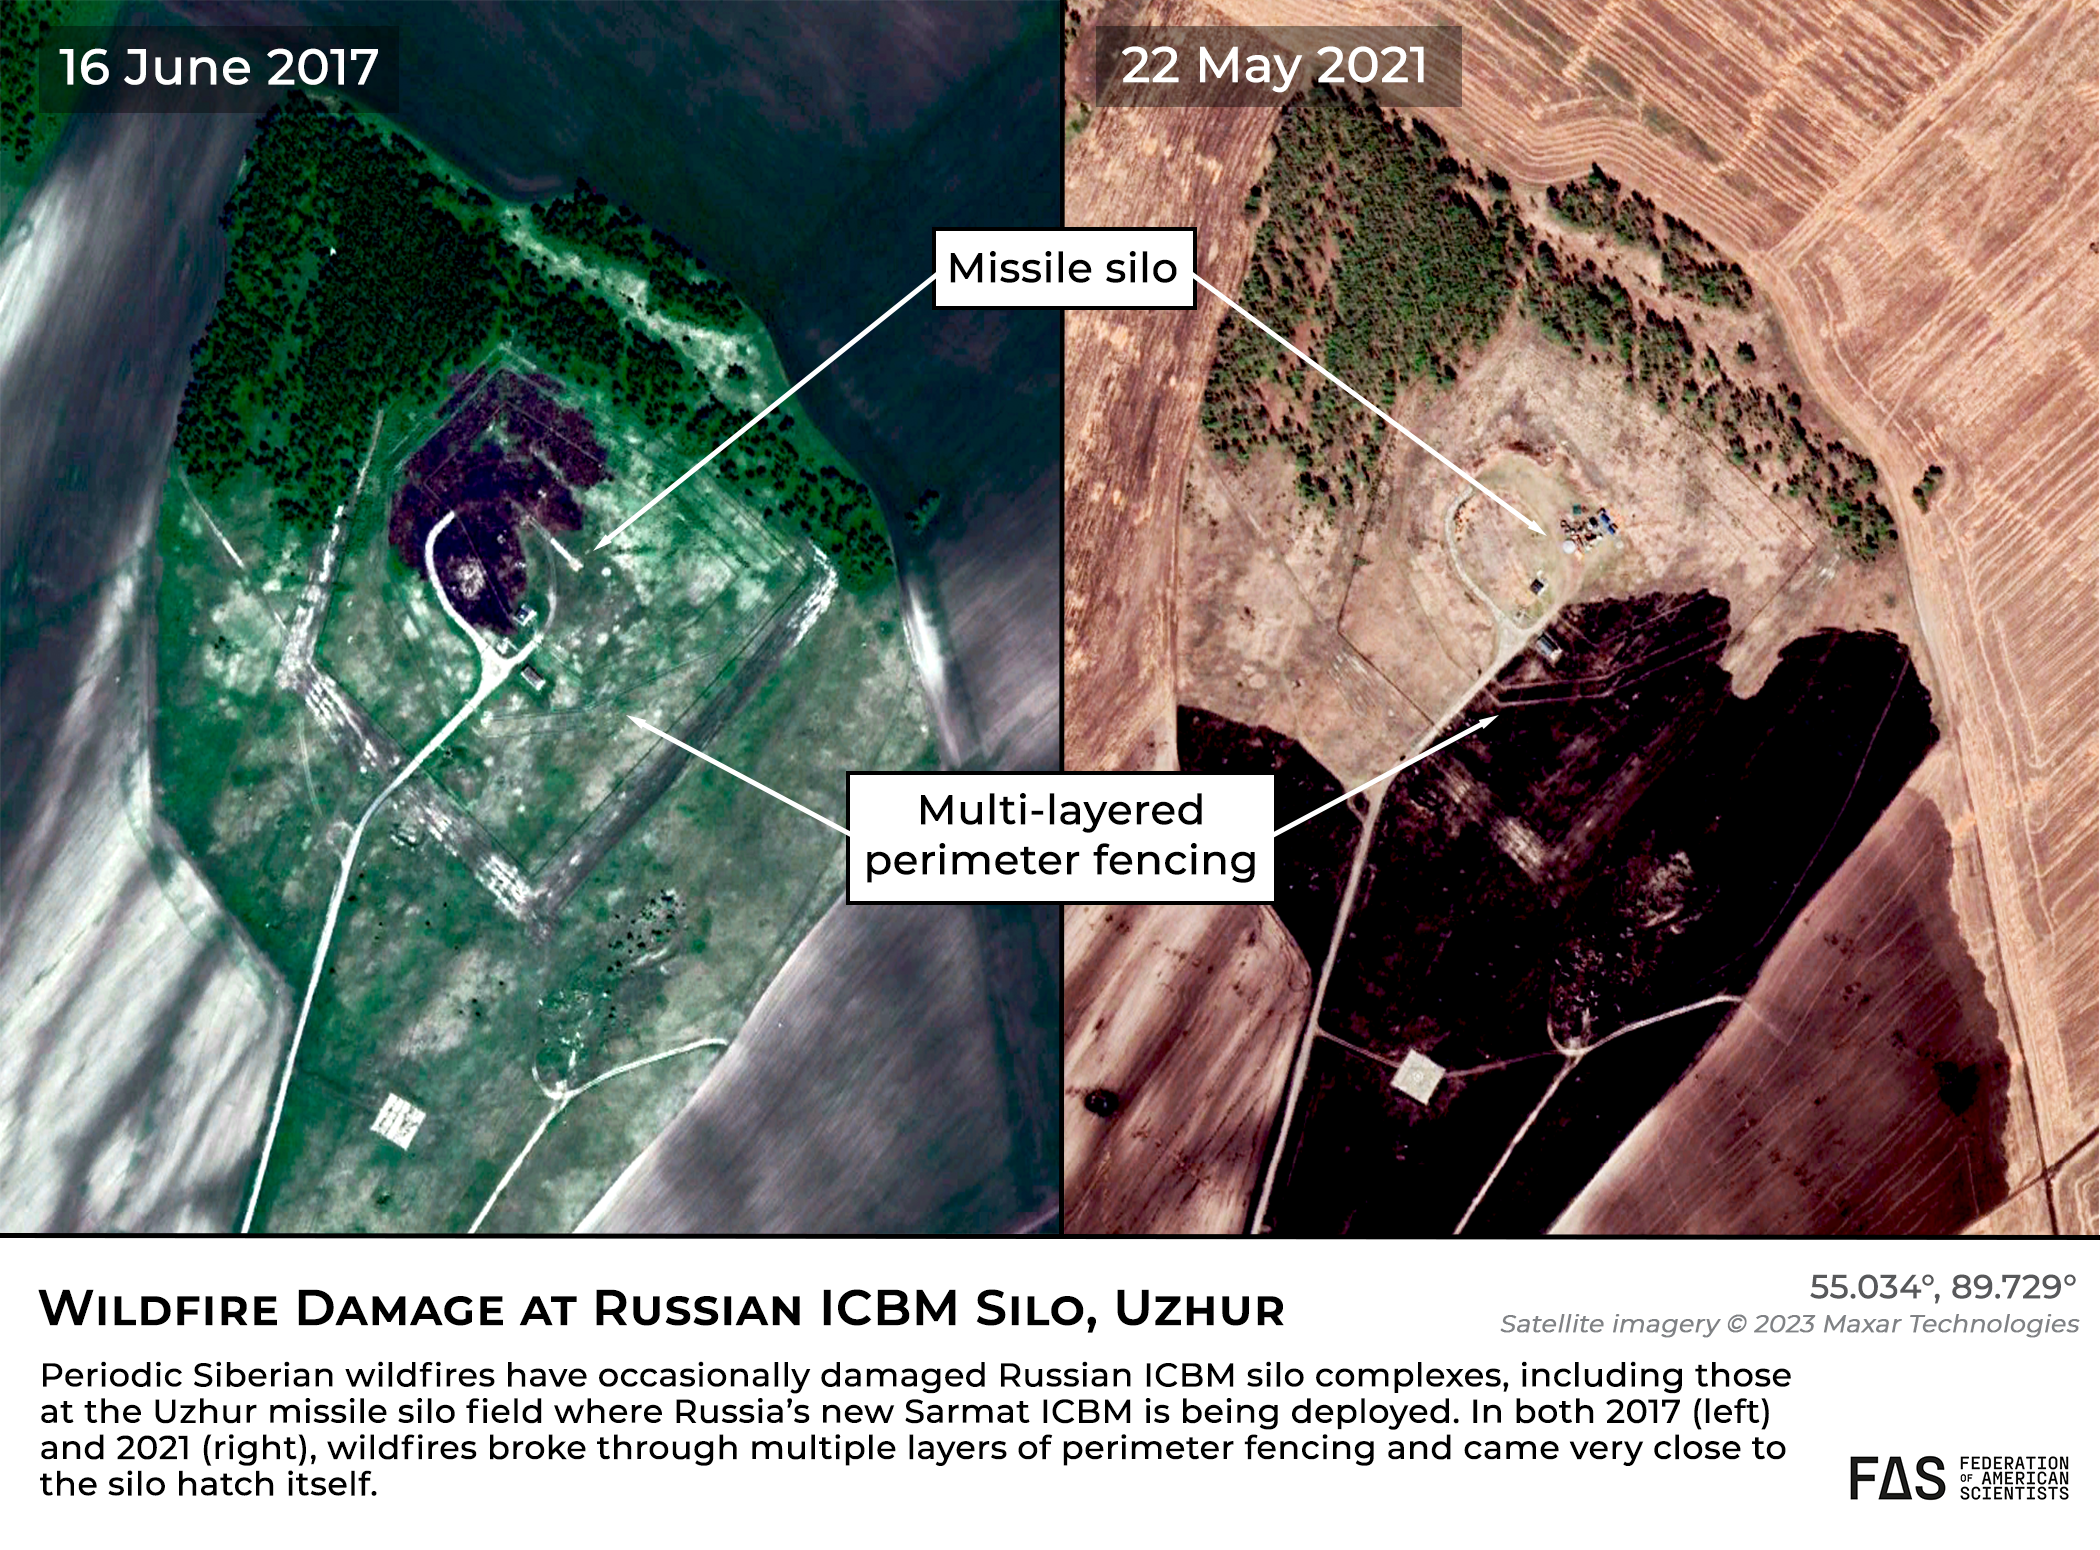 Annotated satellite image showing extensive wildfire damage to the same silo complex at the Uzhur missile silo field.